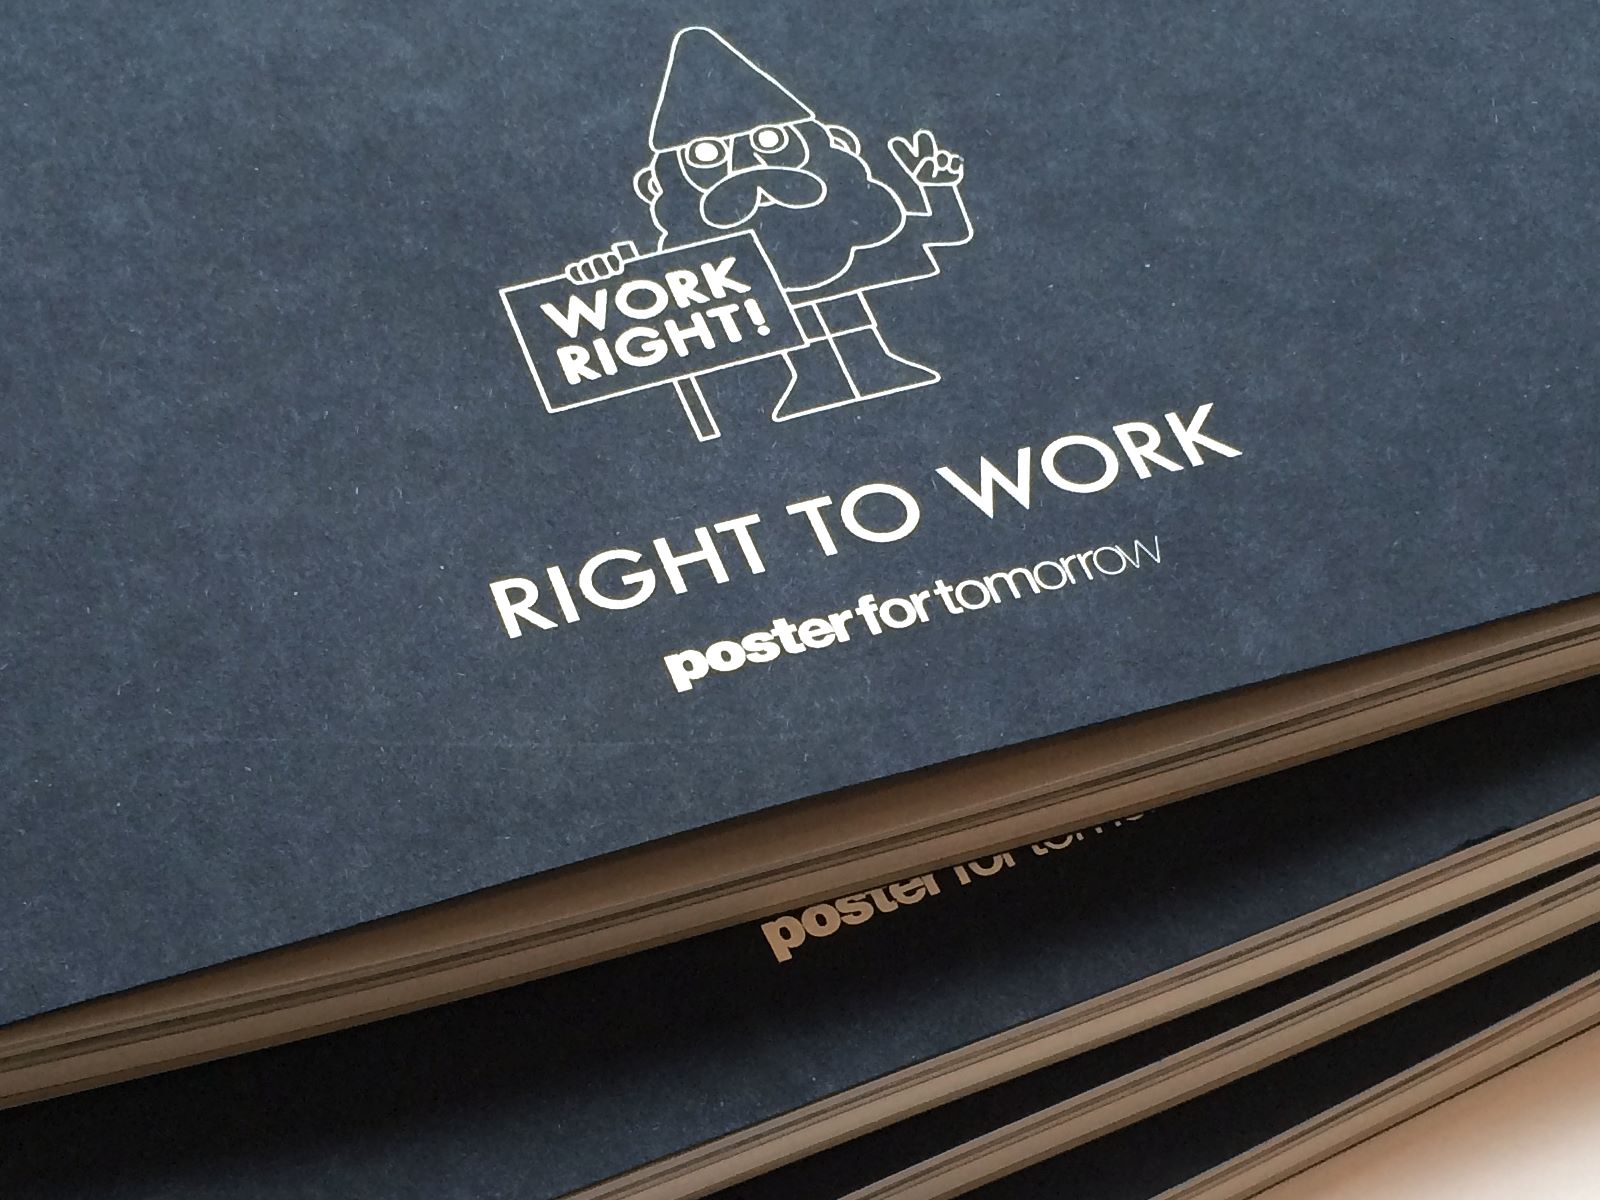 Poster for tomorrow, Work Right 2014 catalogue 1